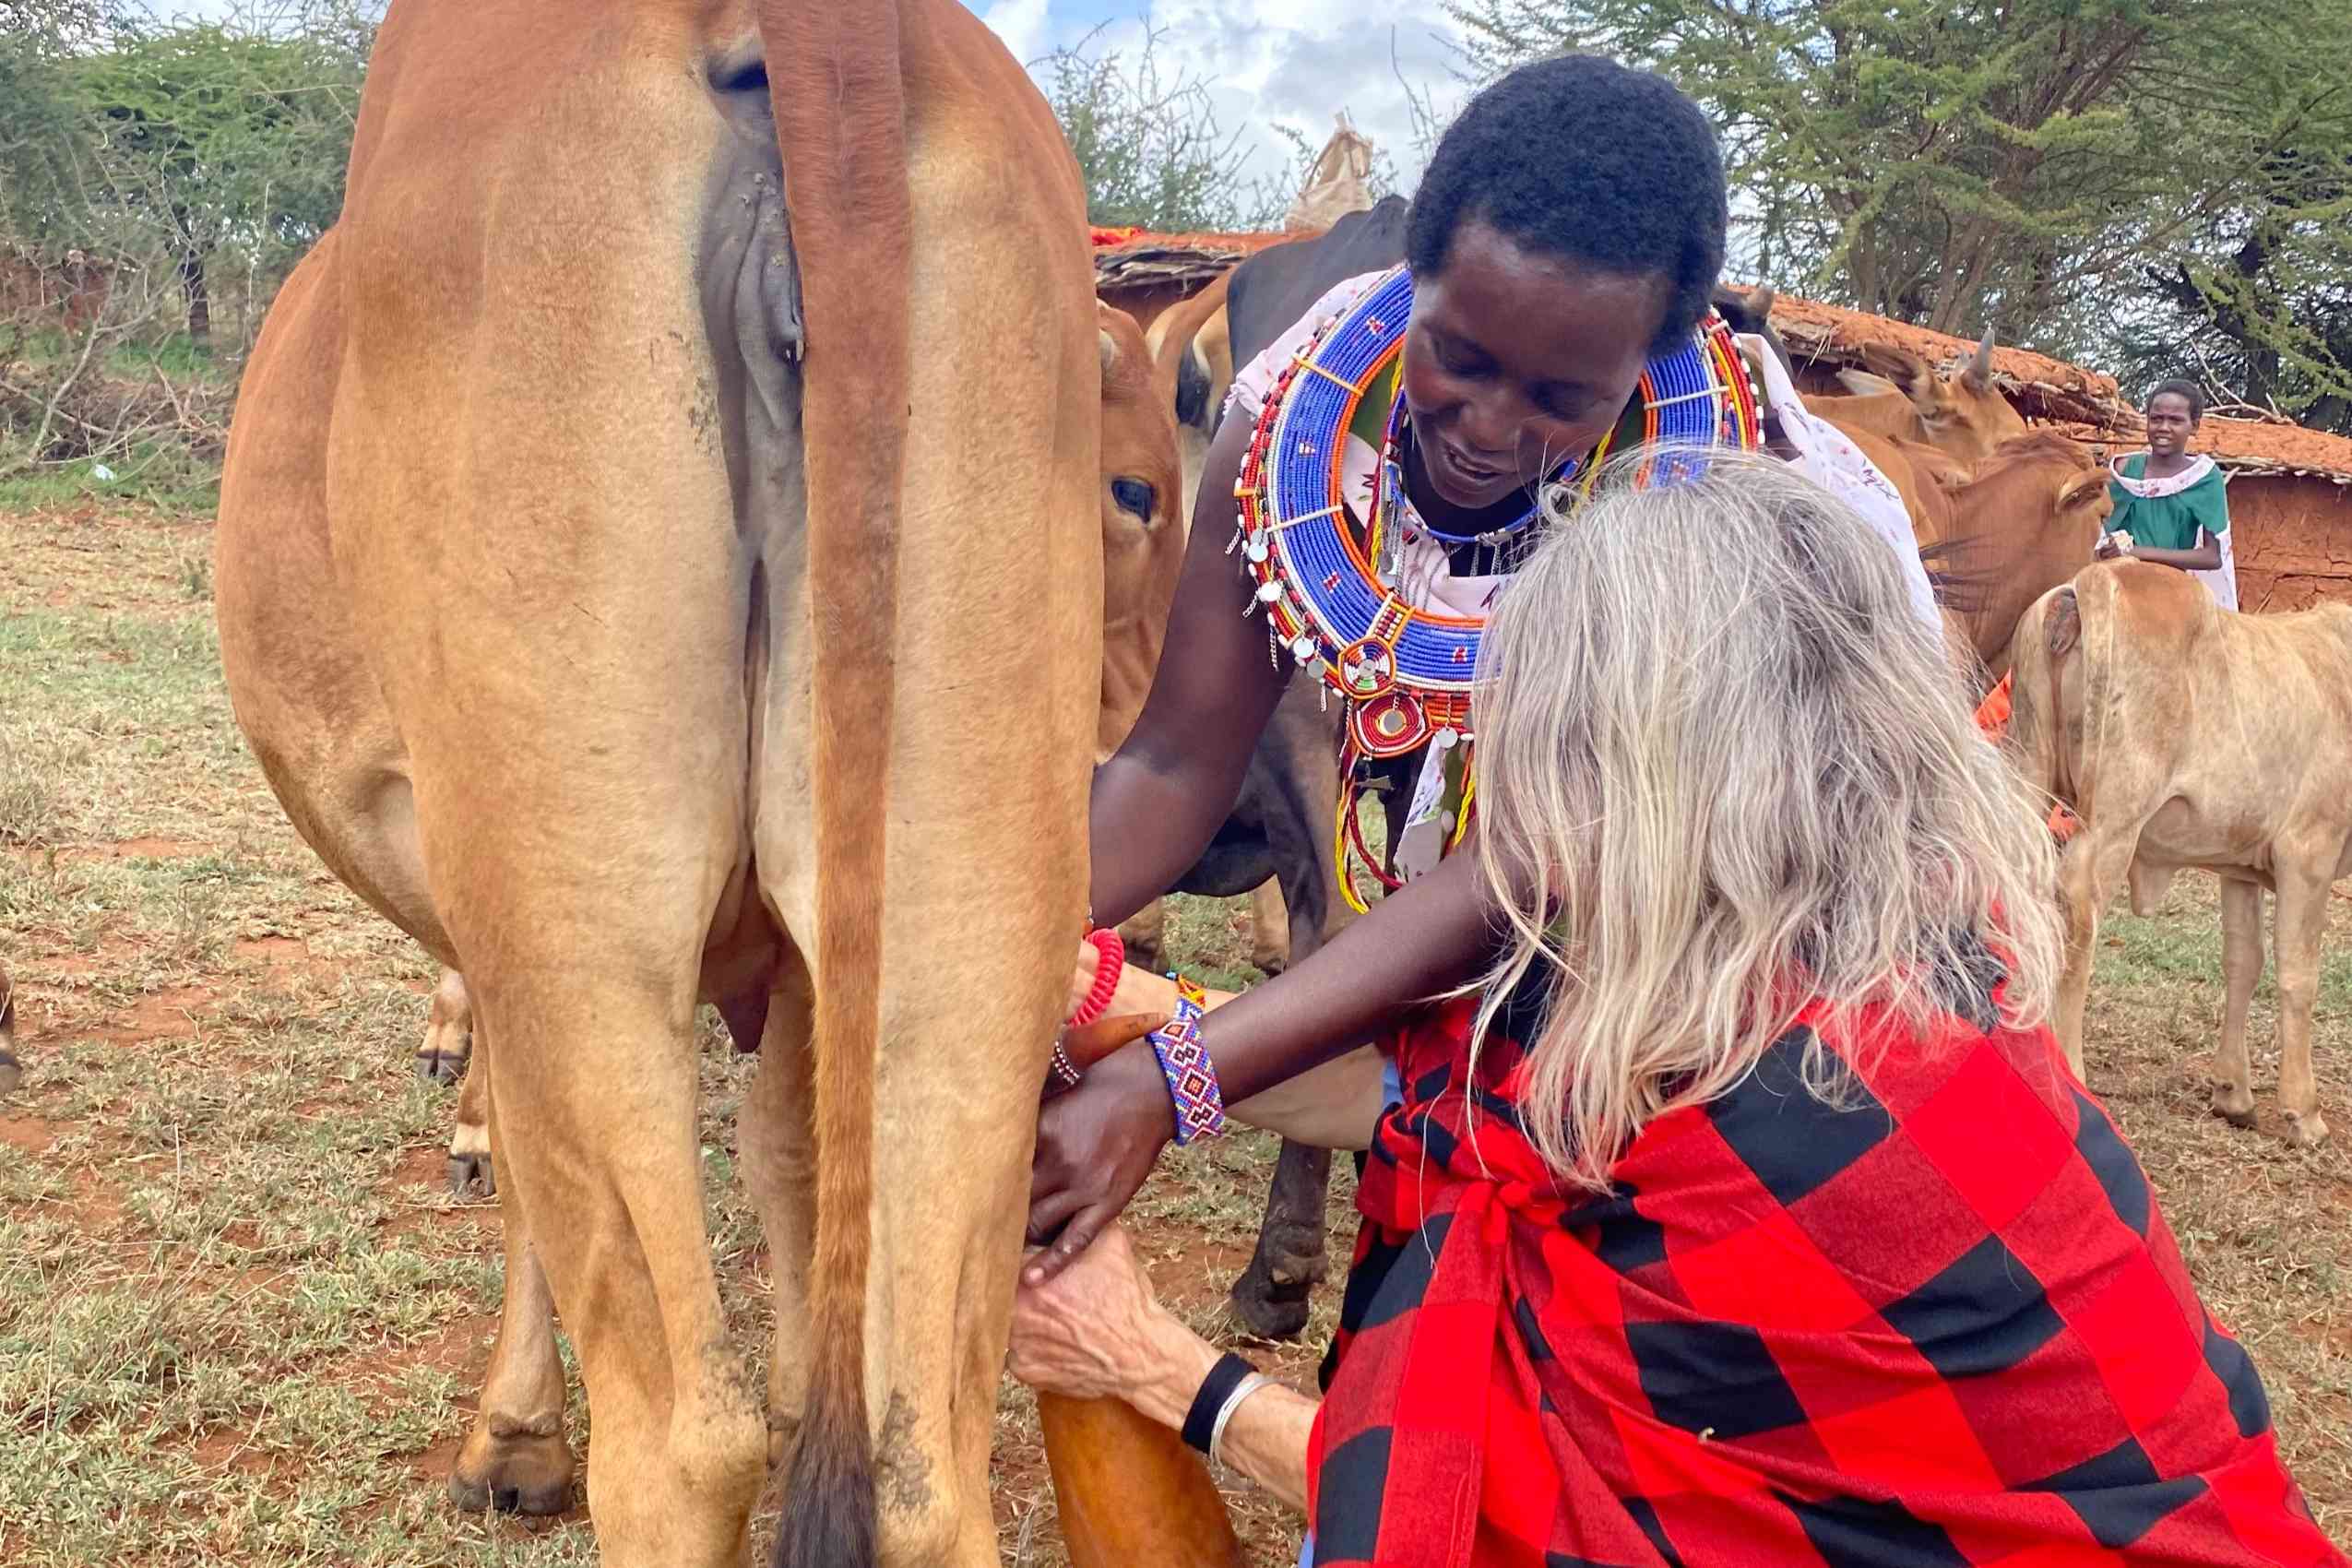 Connect with Kenya's Social Good Experience